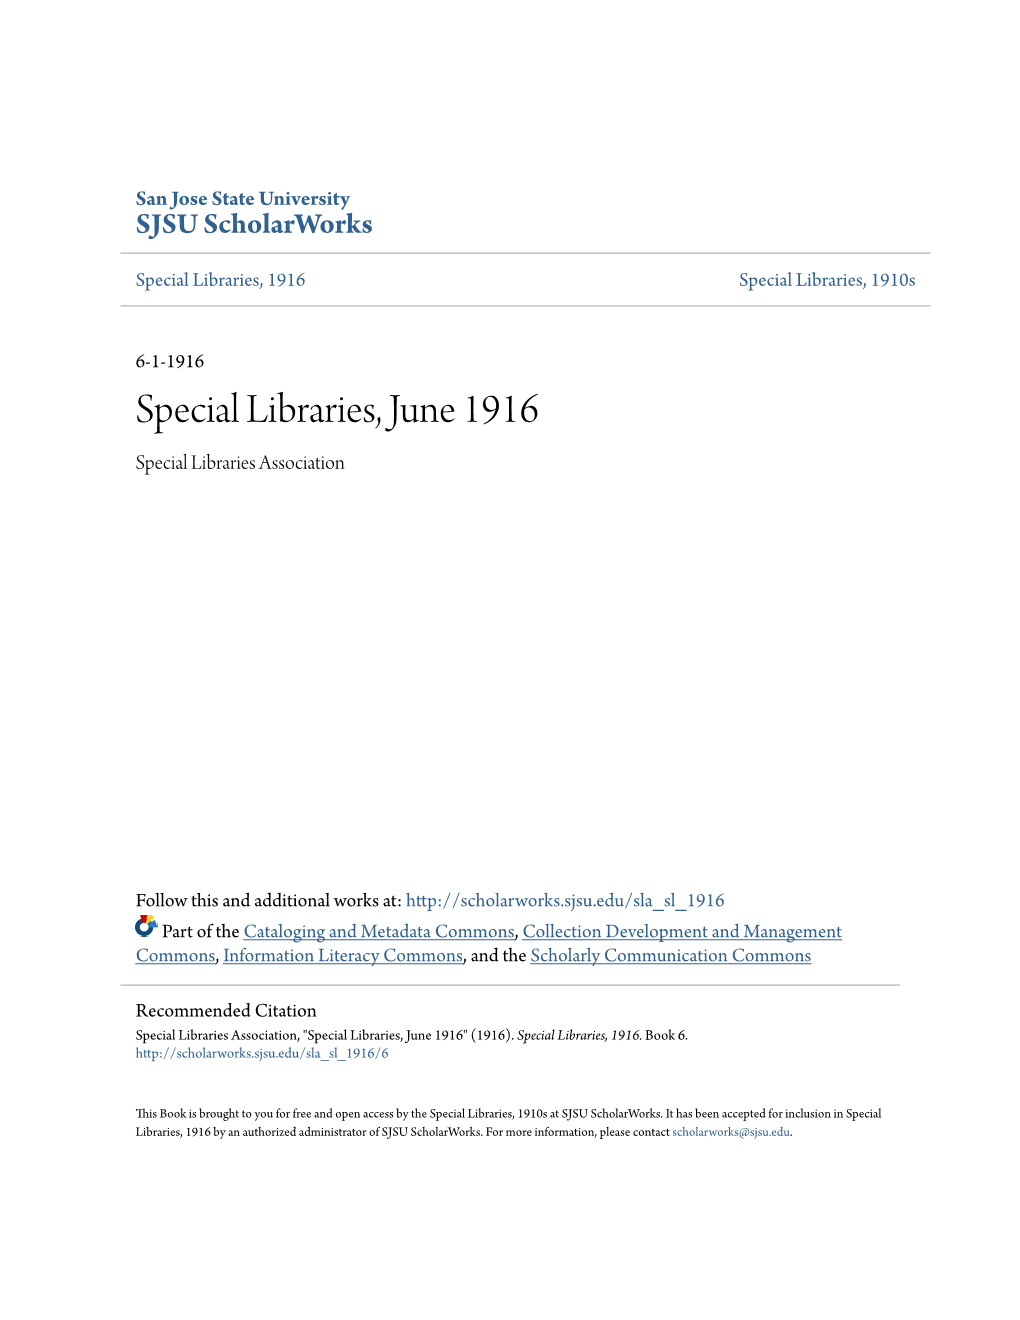 Special Libraries, June 1916 Special Libraries Association